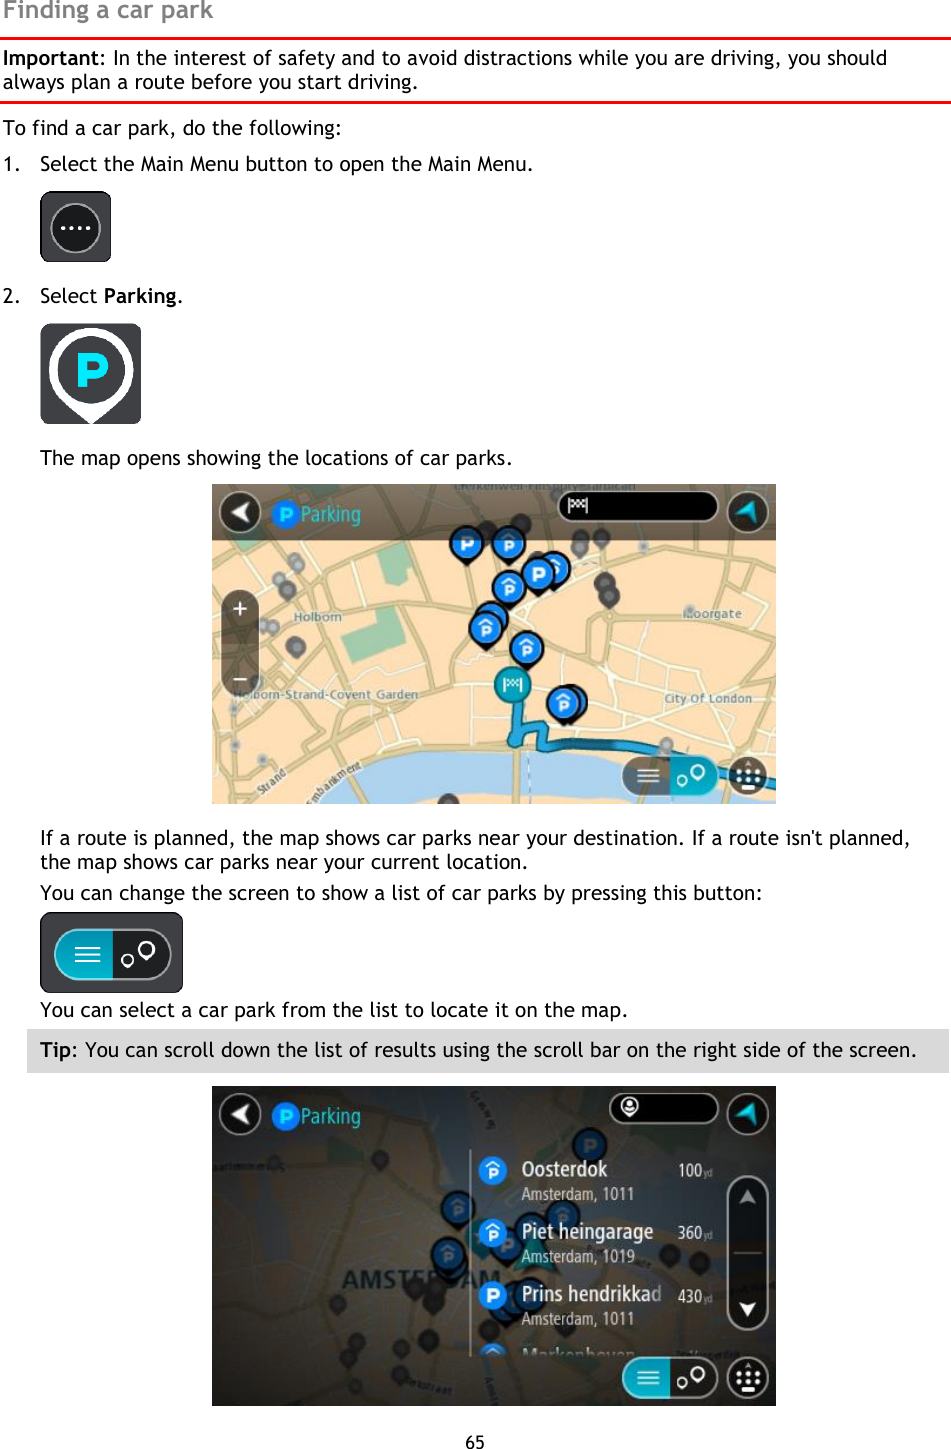 65    Finding a car park Important: In the interest of safety and to avoid distractions while you are driving, you should always plan a route before you start driving. To find a car park, do the following: 1. Select the Main Menu button to open the Main Menu.    2. Select Parking.  The map opens showing the locations of car parks.  If a route is planned, the map shows car parks near your destination. If a route isn&apos;t planned, the map shows car parks near your current location. You can change the screen to show a list of car parks by pressing this button:  You can select a car park from the list to locate it on the map. Tip: You can scroll down the list of results using the scroll bar on the right side of the screen.  